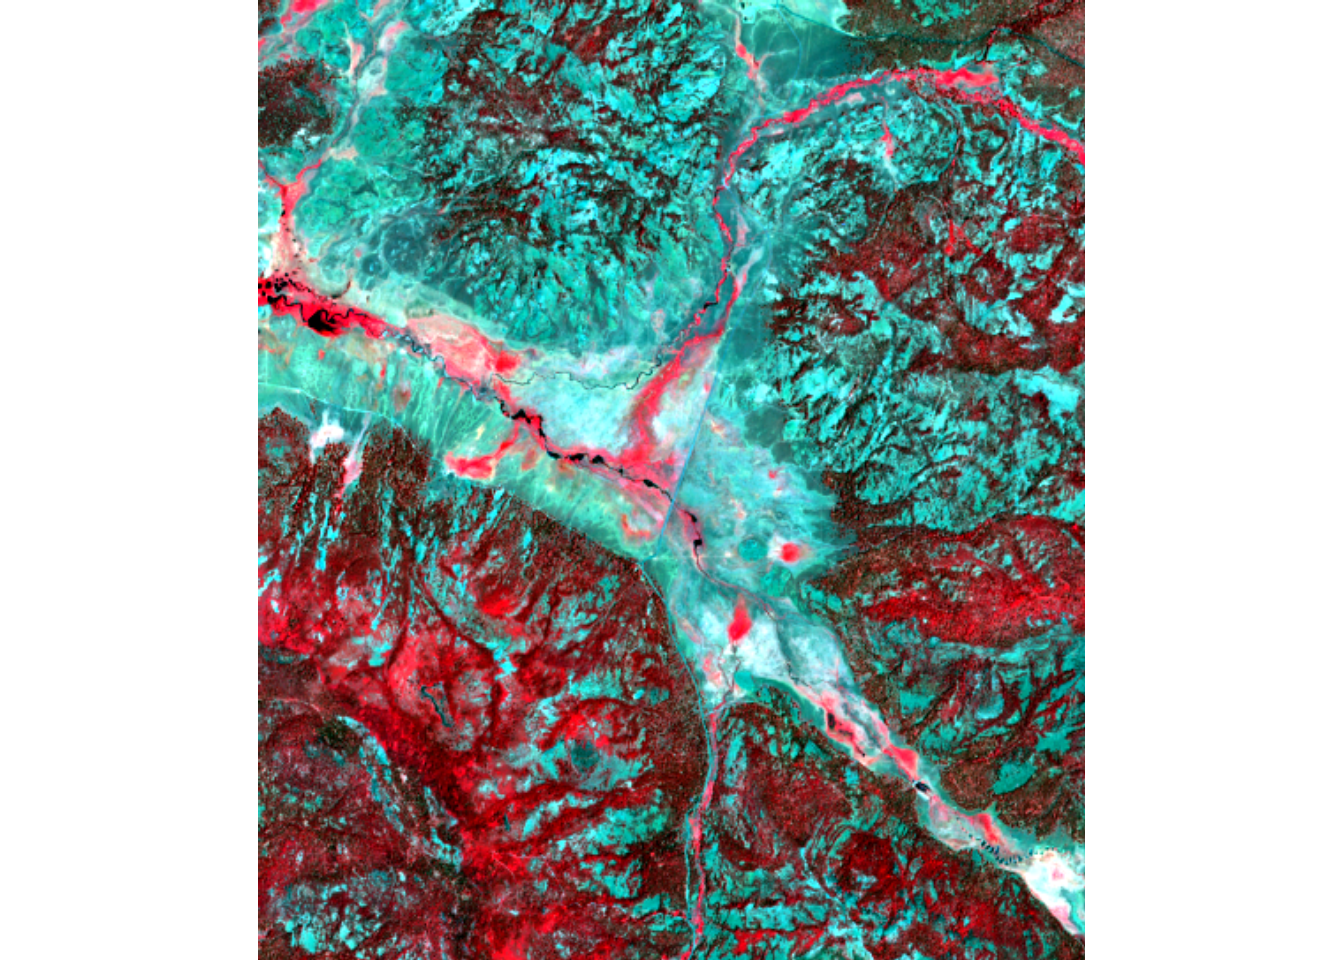 NIR-R-G image from Sentinel-2 of Red Clover Valley, 20210628.